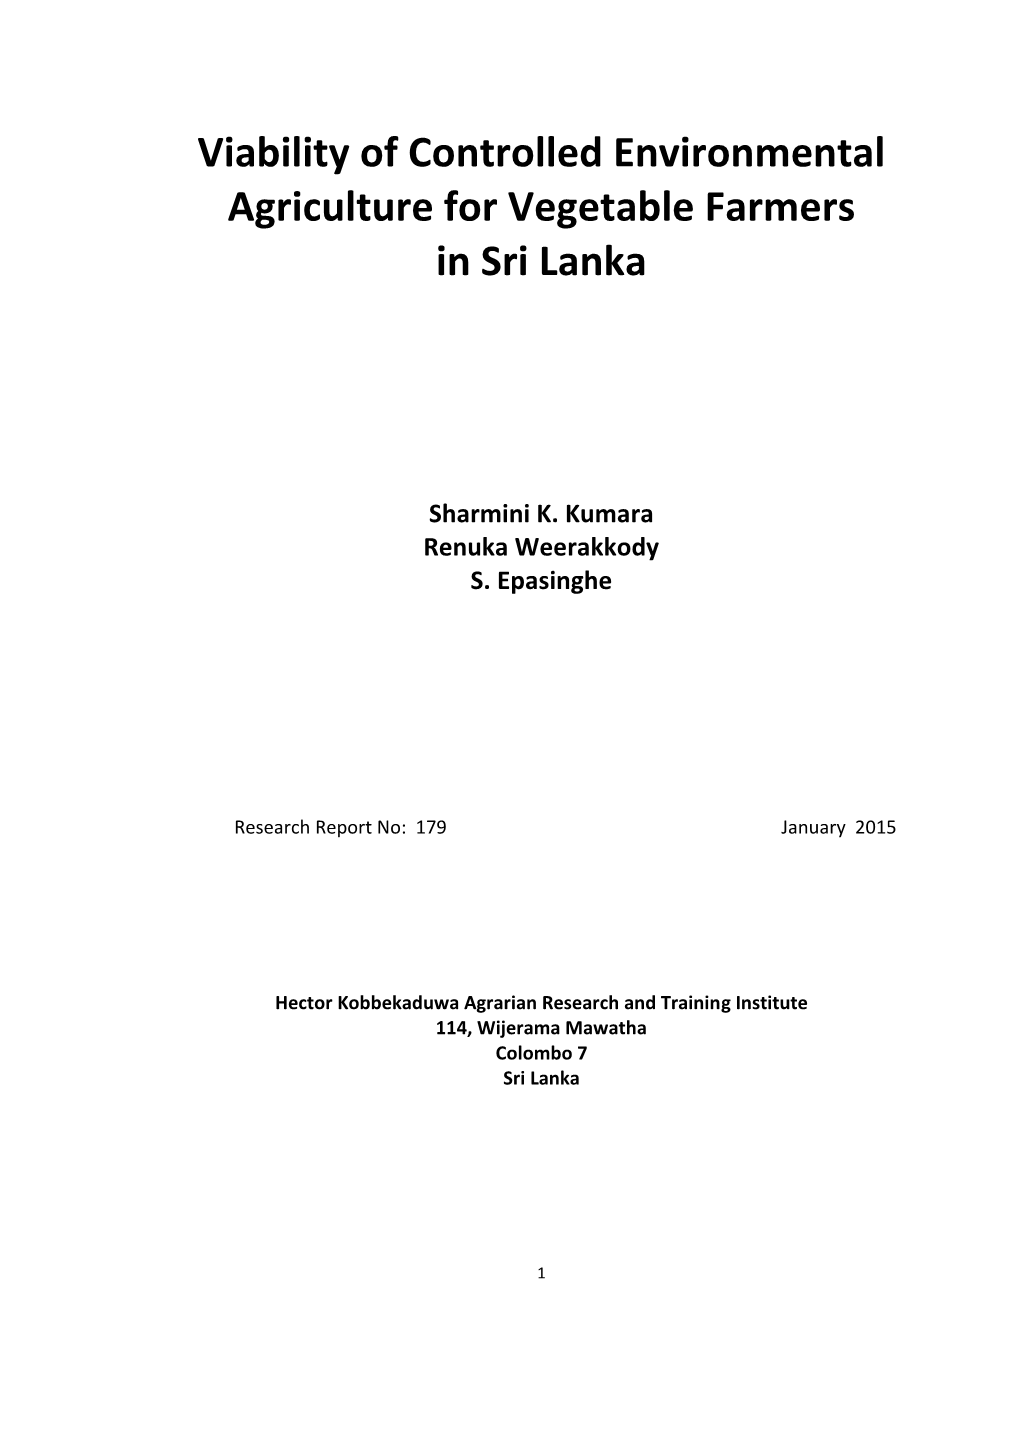 Viability of Controlled Environmental Agriculture for Vegetable Farmers in Sri Lanka